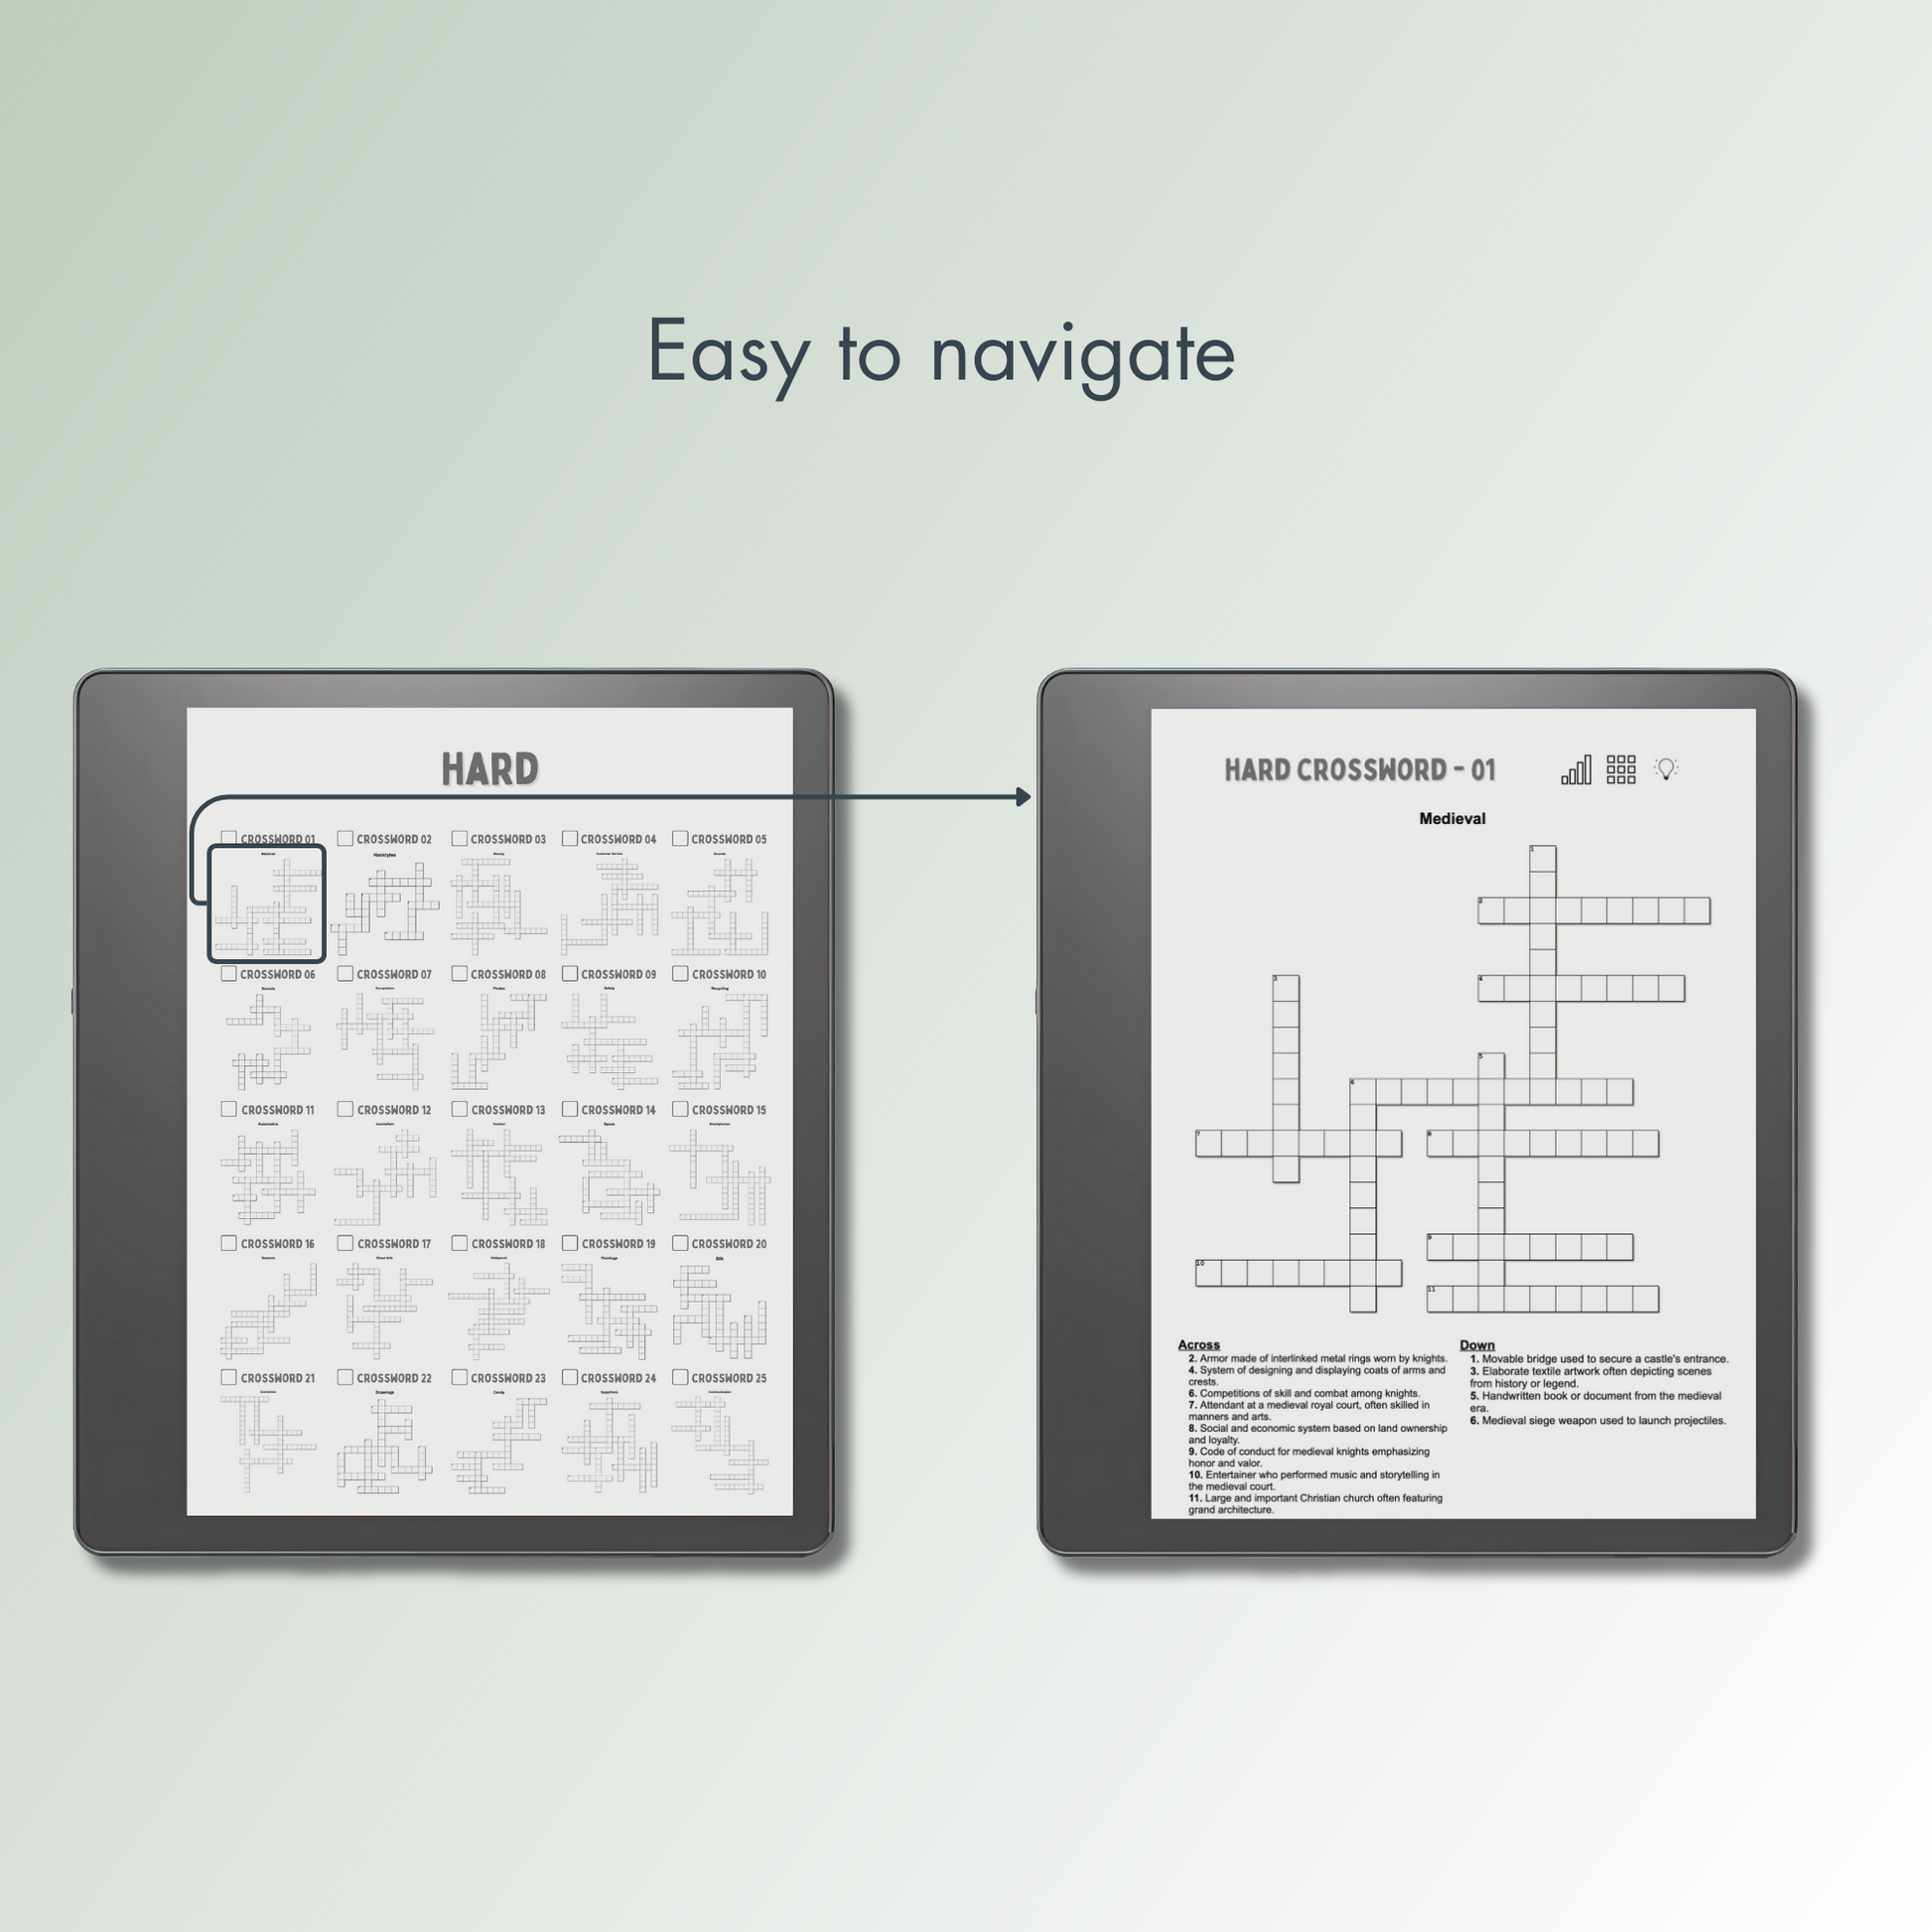 Kindle Scribe Crossword Puzzles with easy navigations.